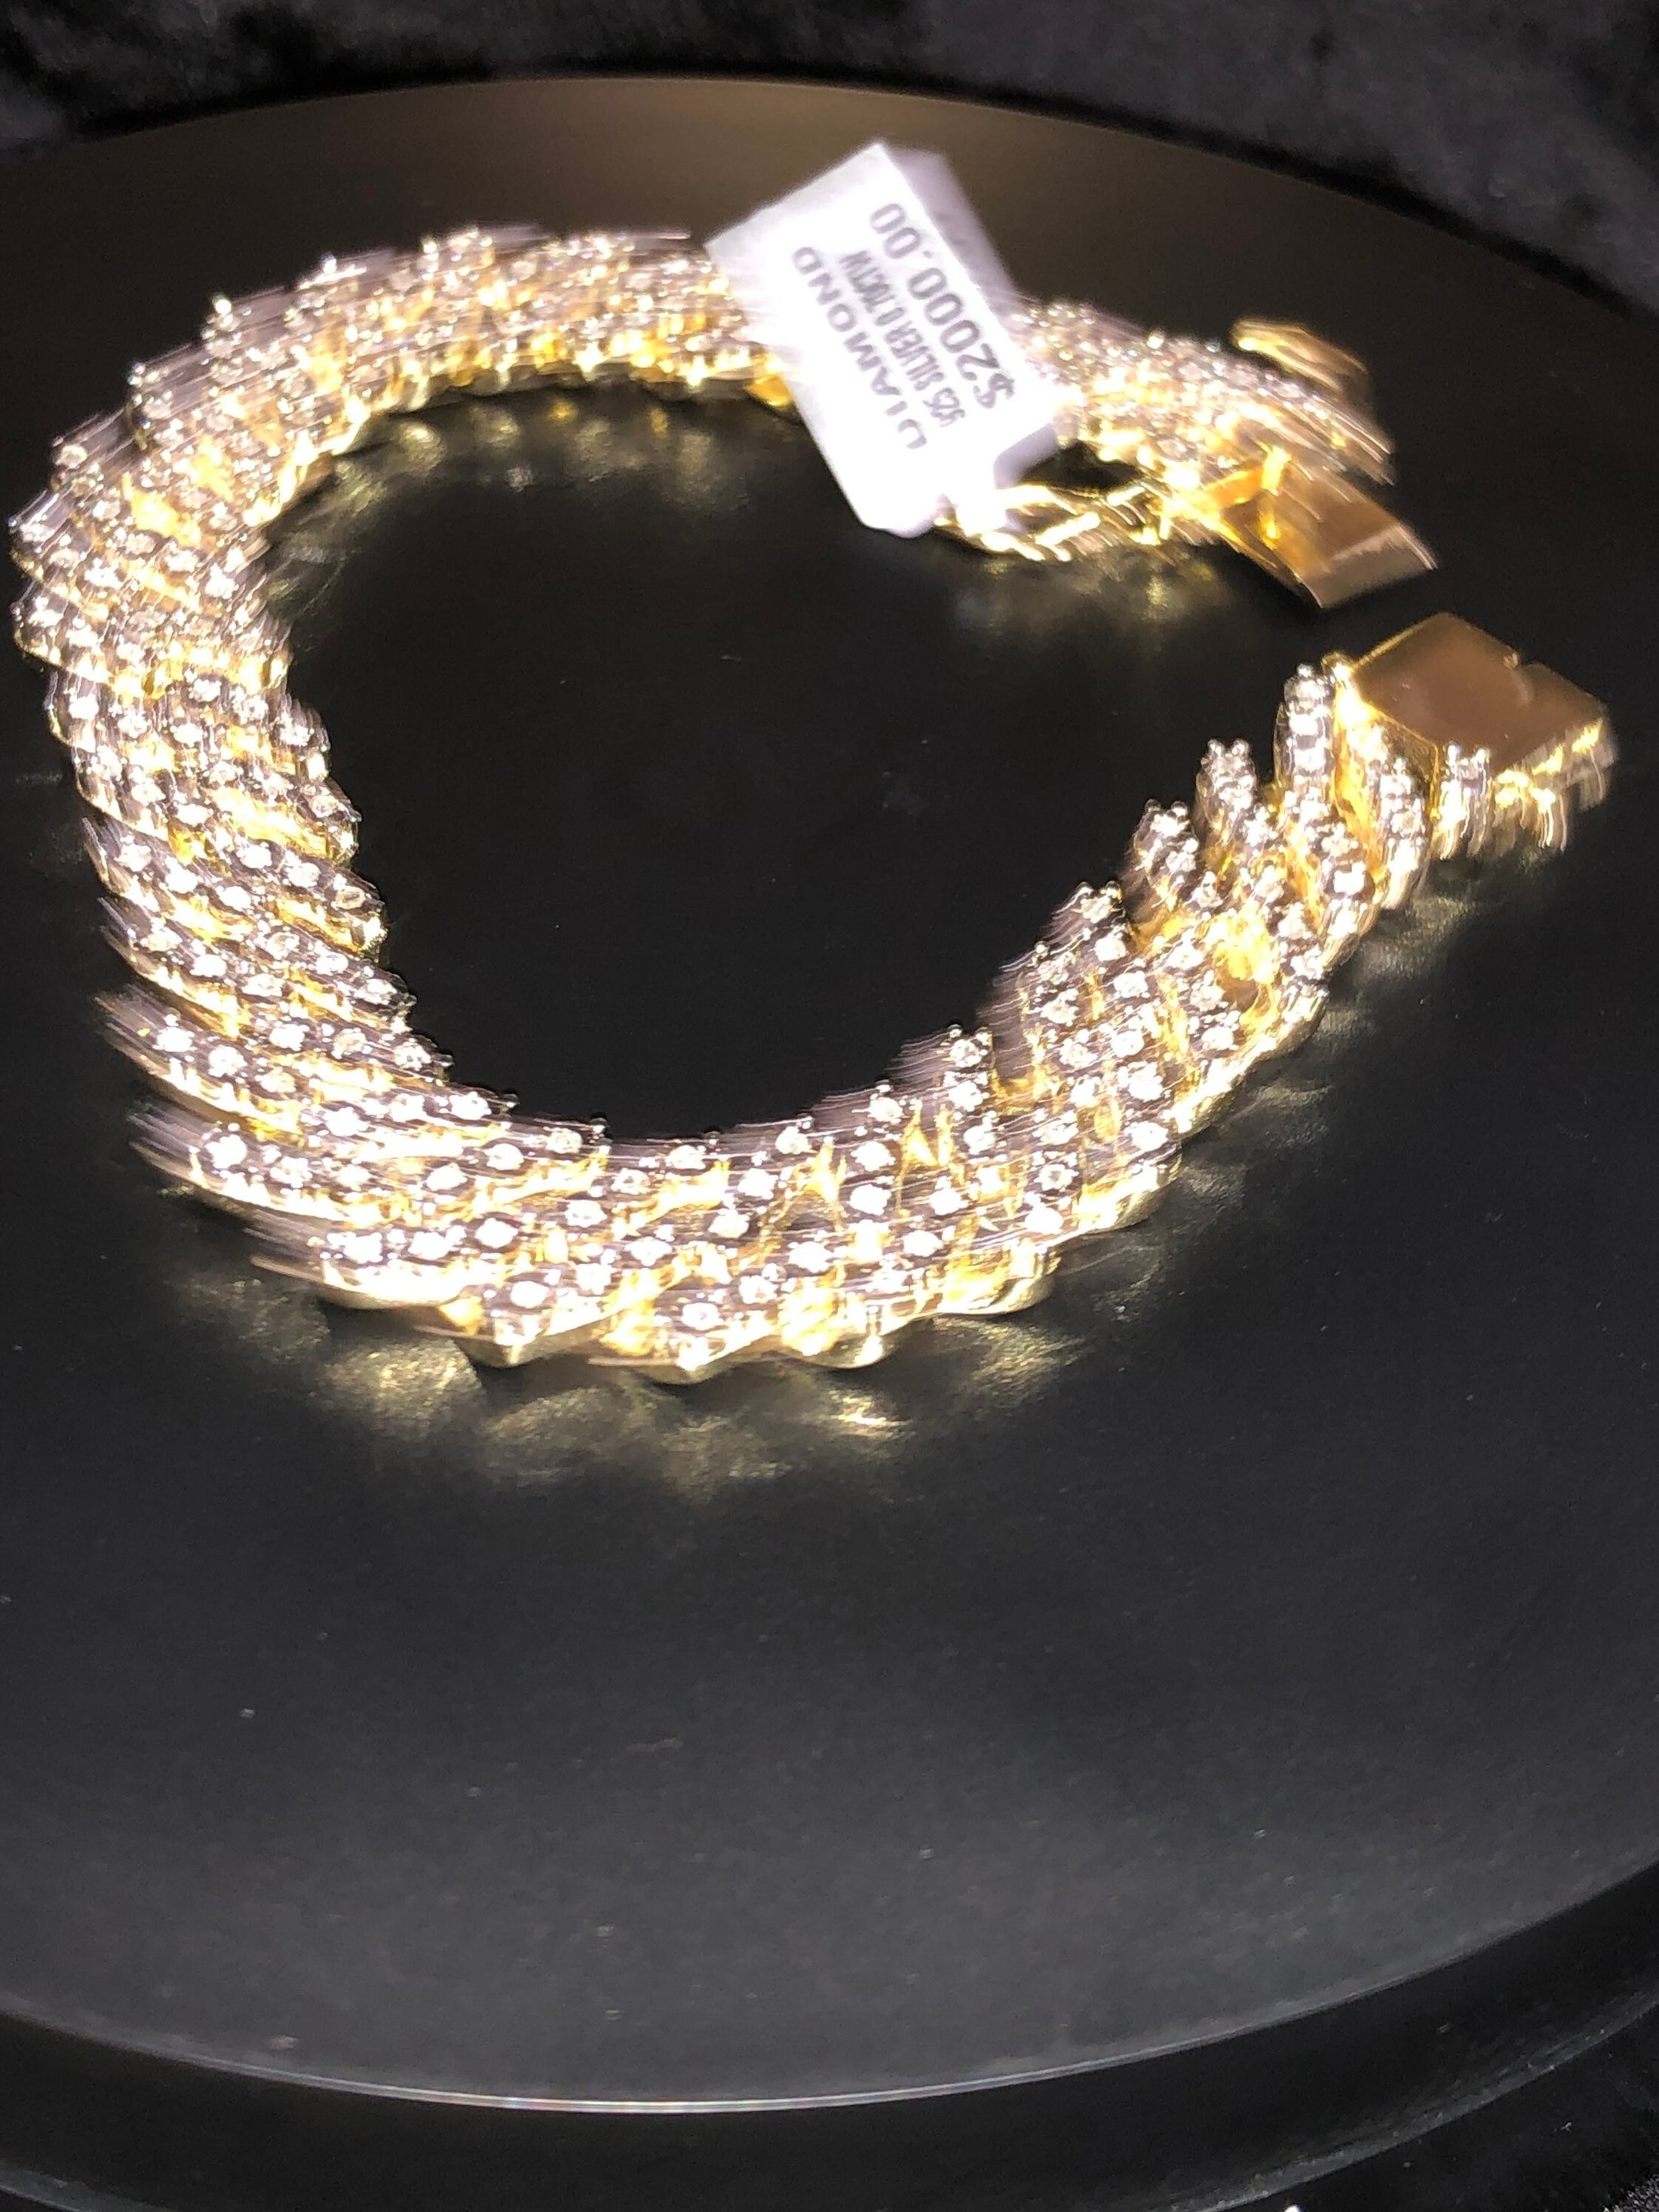 Real diamond custom made Cuban link bracelets! Best seller The best gift every man would love! The hottest seller because its custom made!